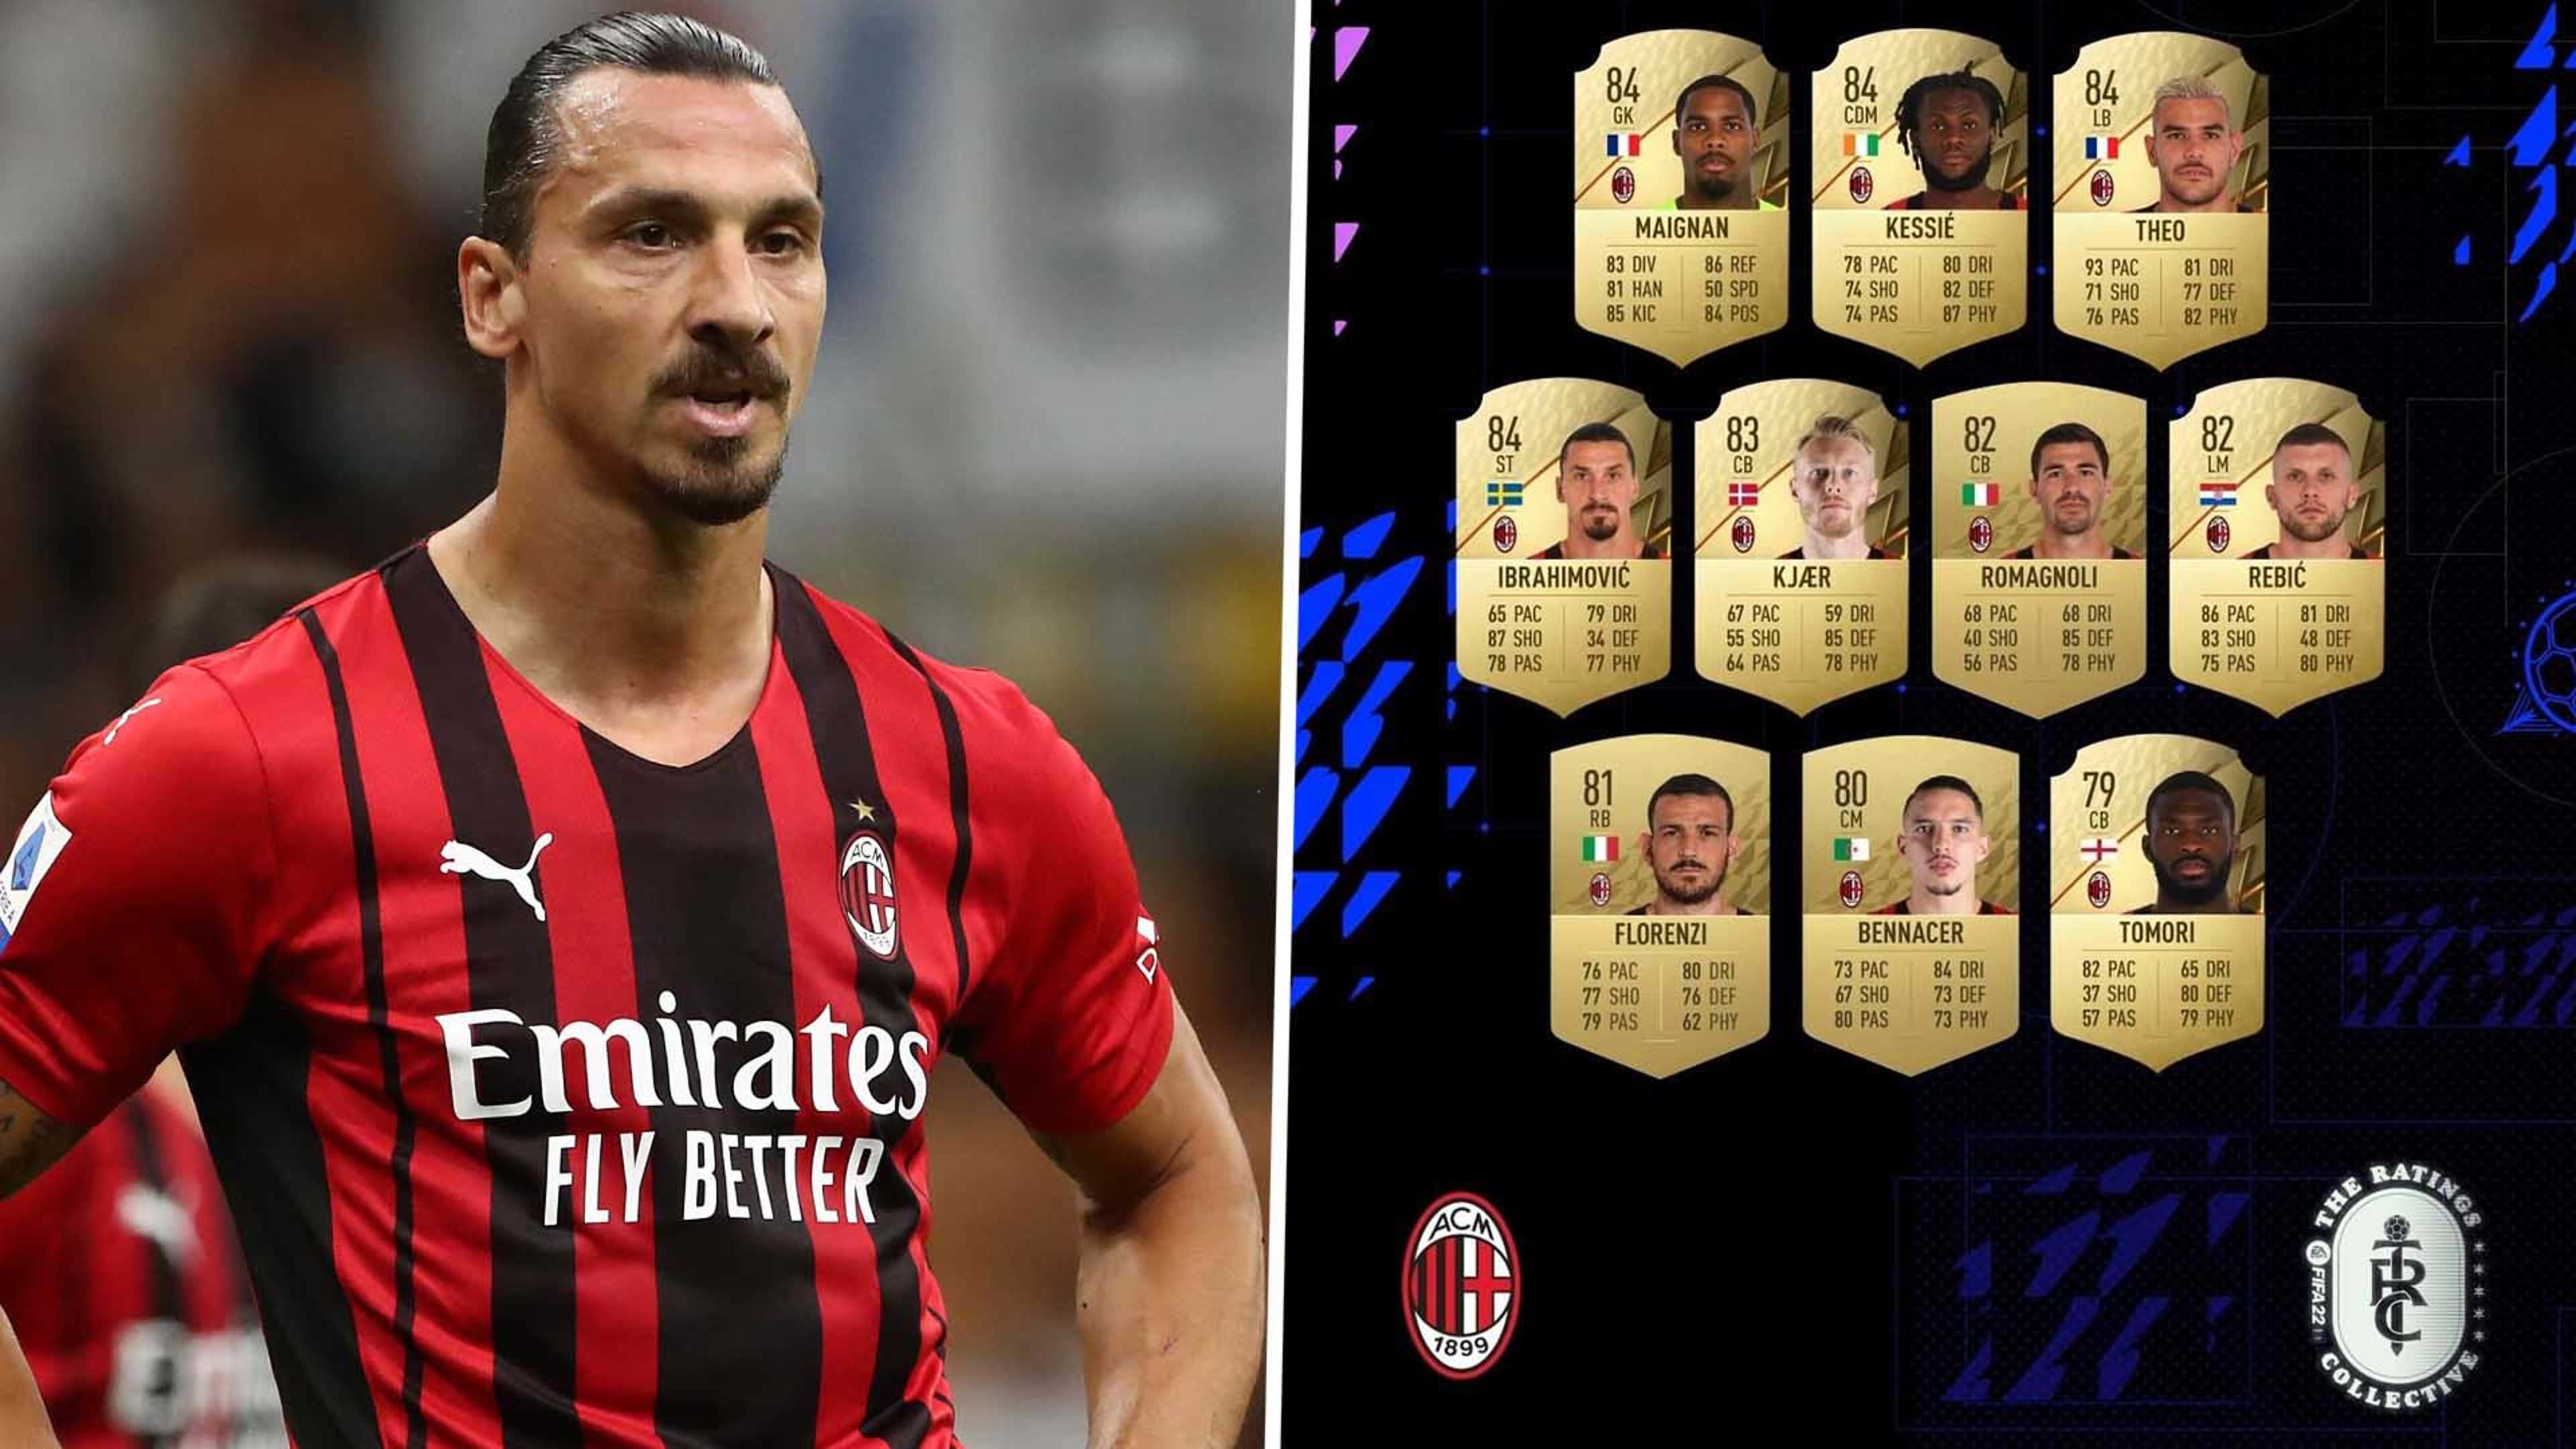 FIFA 22 ratings guide to the best male and female players